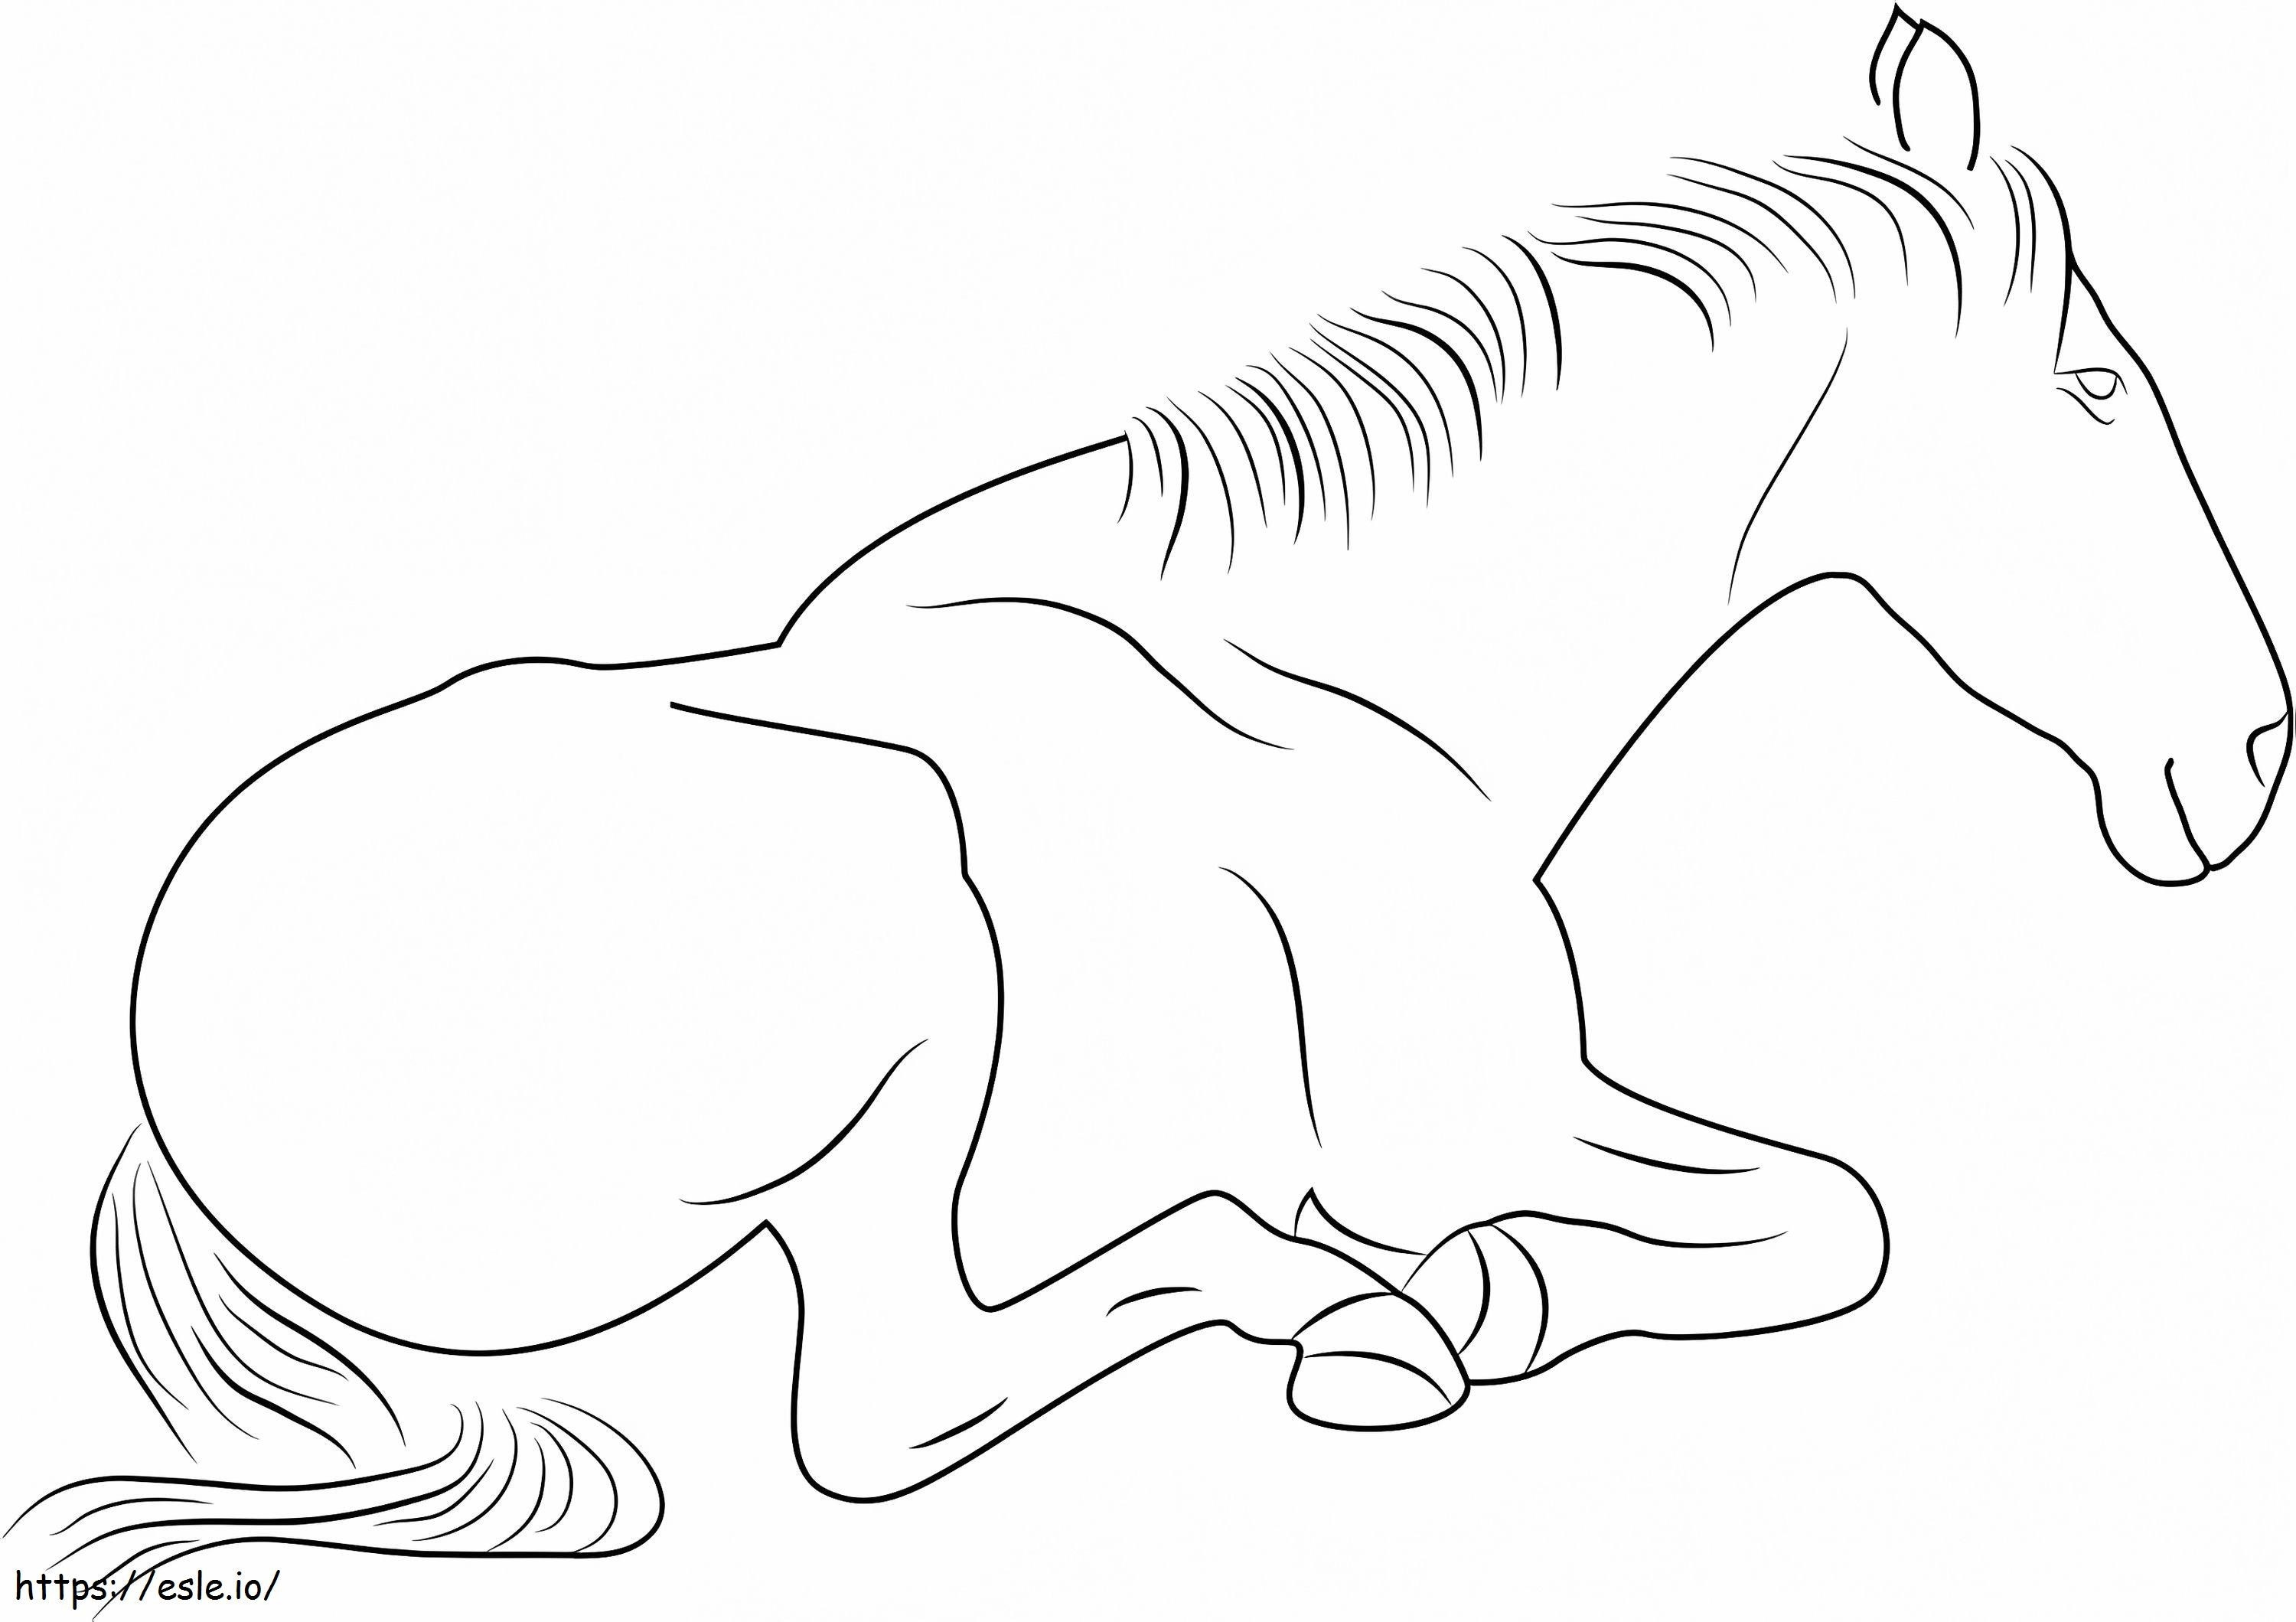 Sitting Horse1 coloring page